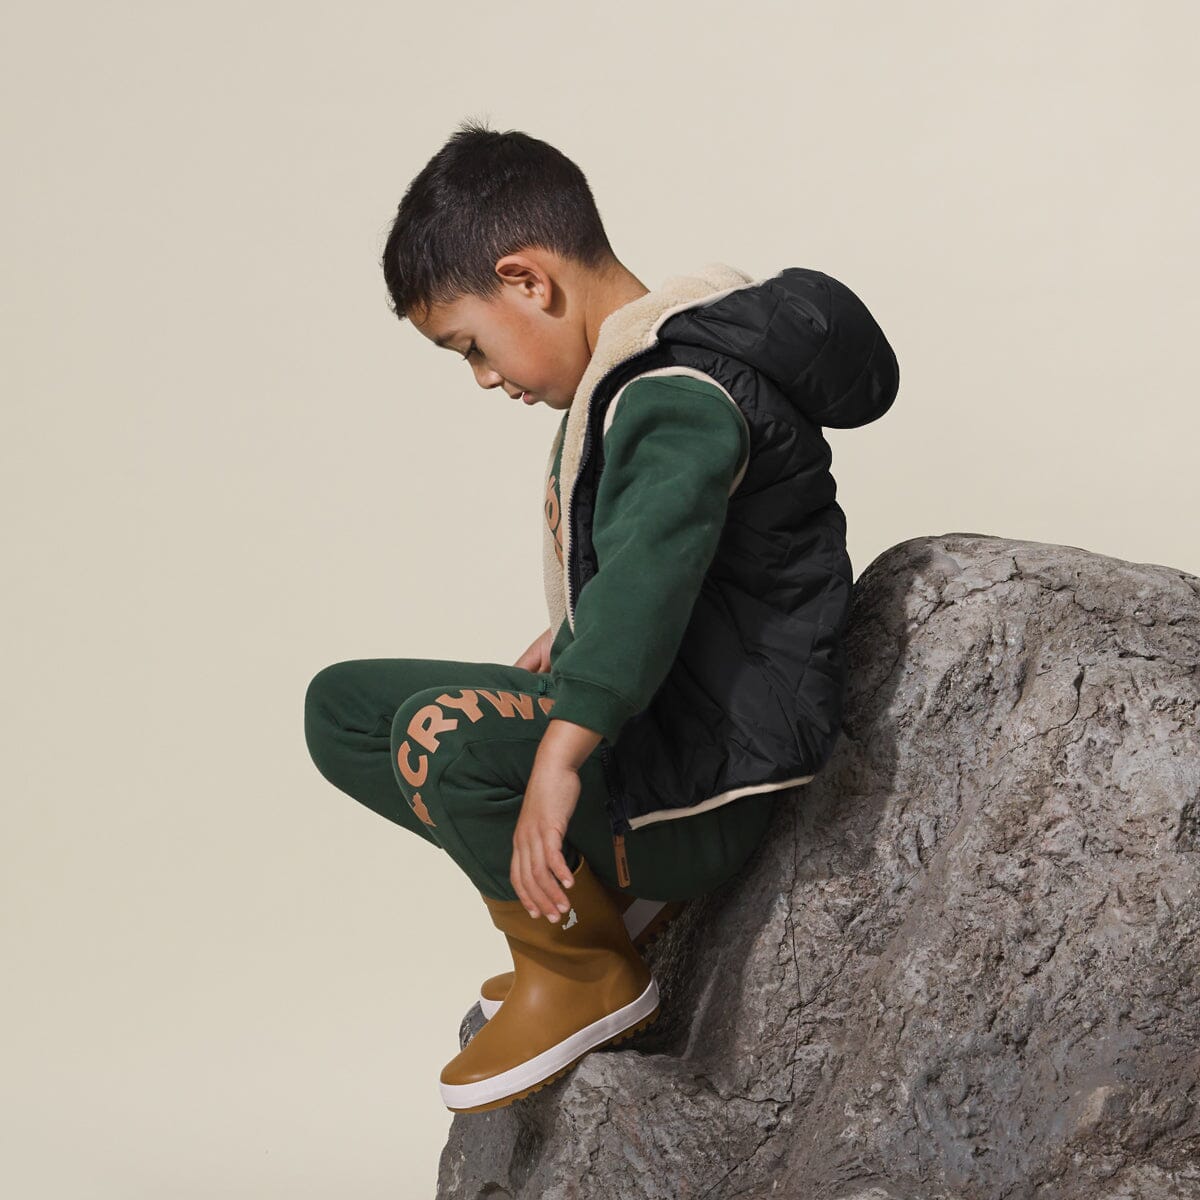 Crywolf | REVERSIBLE YETI VEST - Black/Camel *** PRE ORDER / DUE EARLY-MID APRIL *** Boys Crywolf